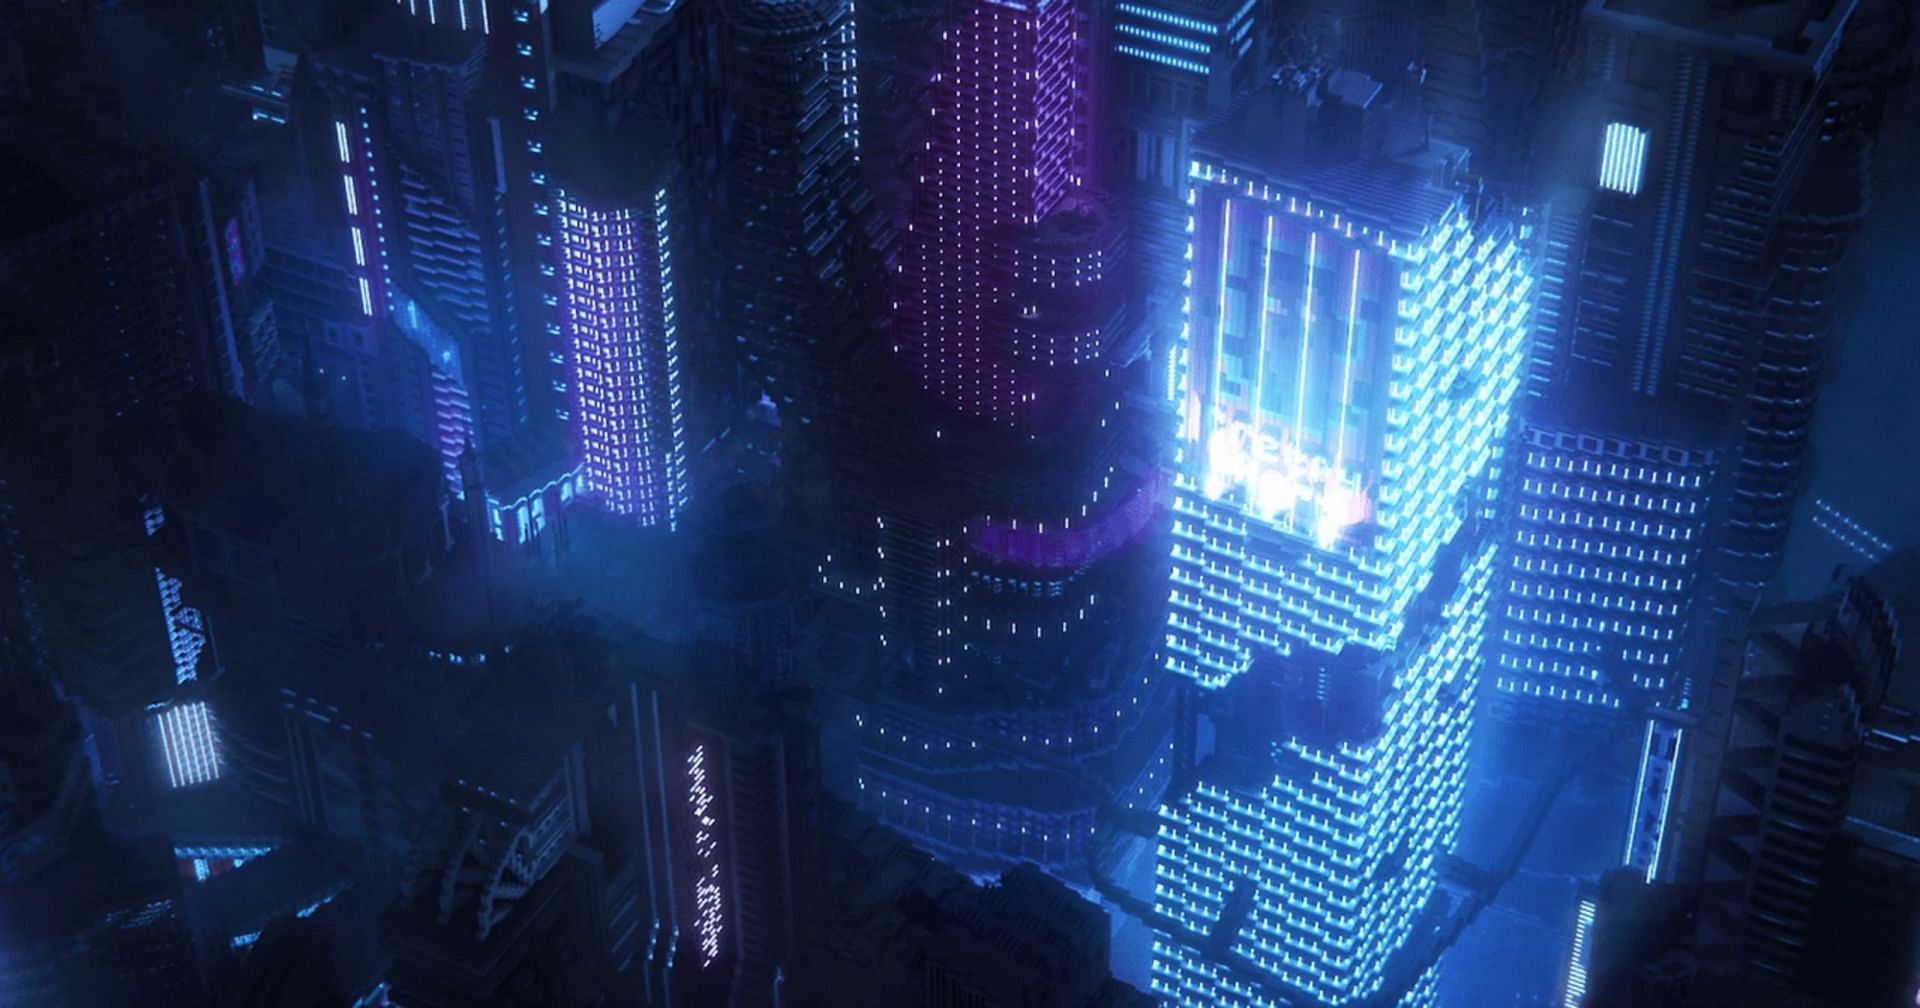 The iconic city of the Cyberpunk universe lovingly recreated by Team Elysium Fire (Image via ElysiumFire/PlanetMinecraft)